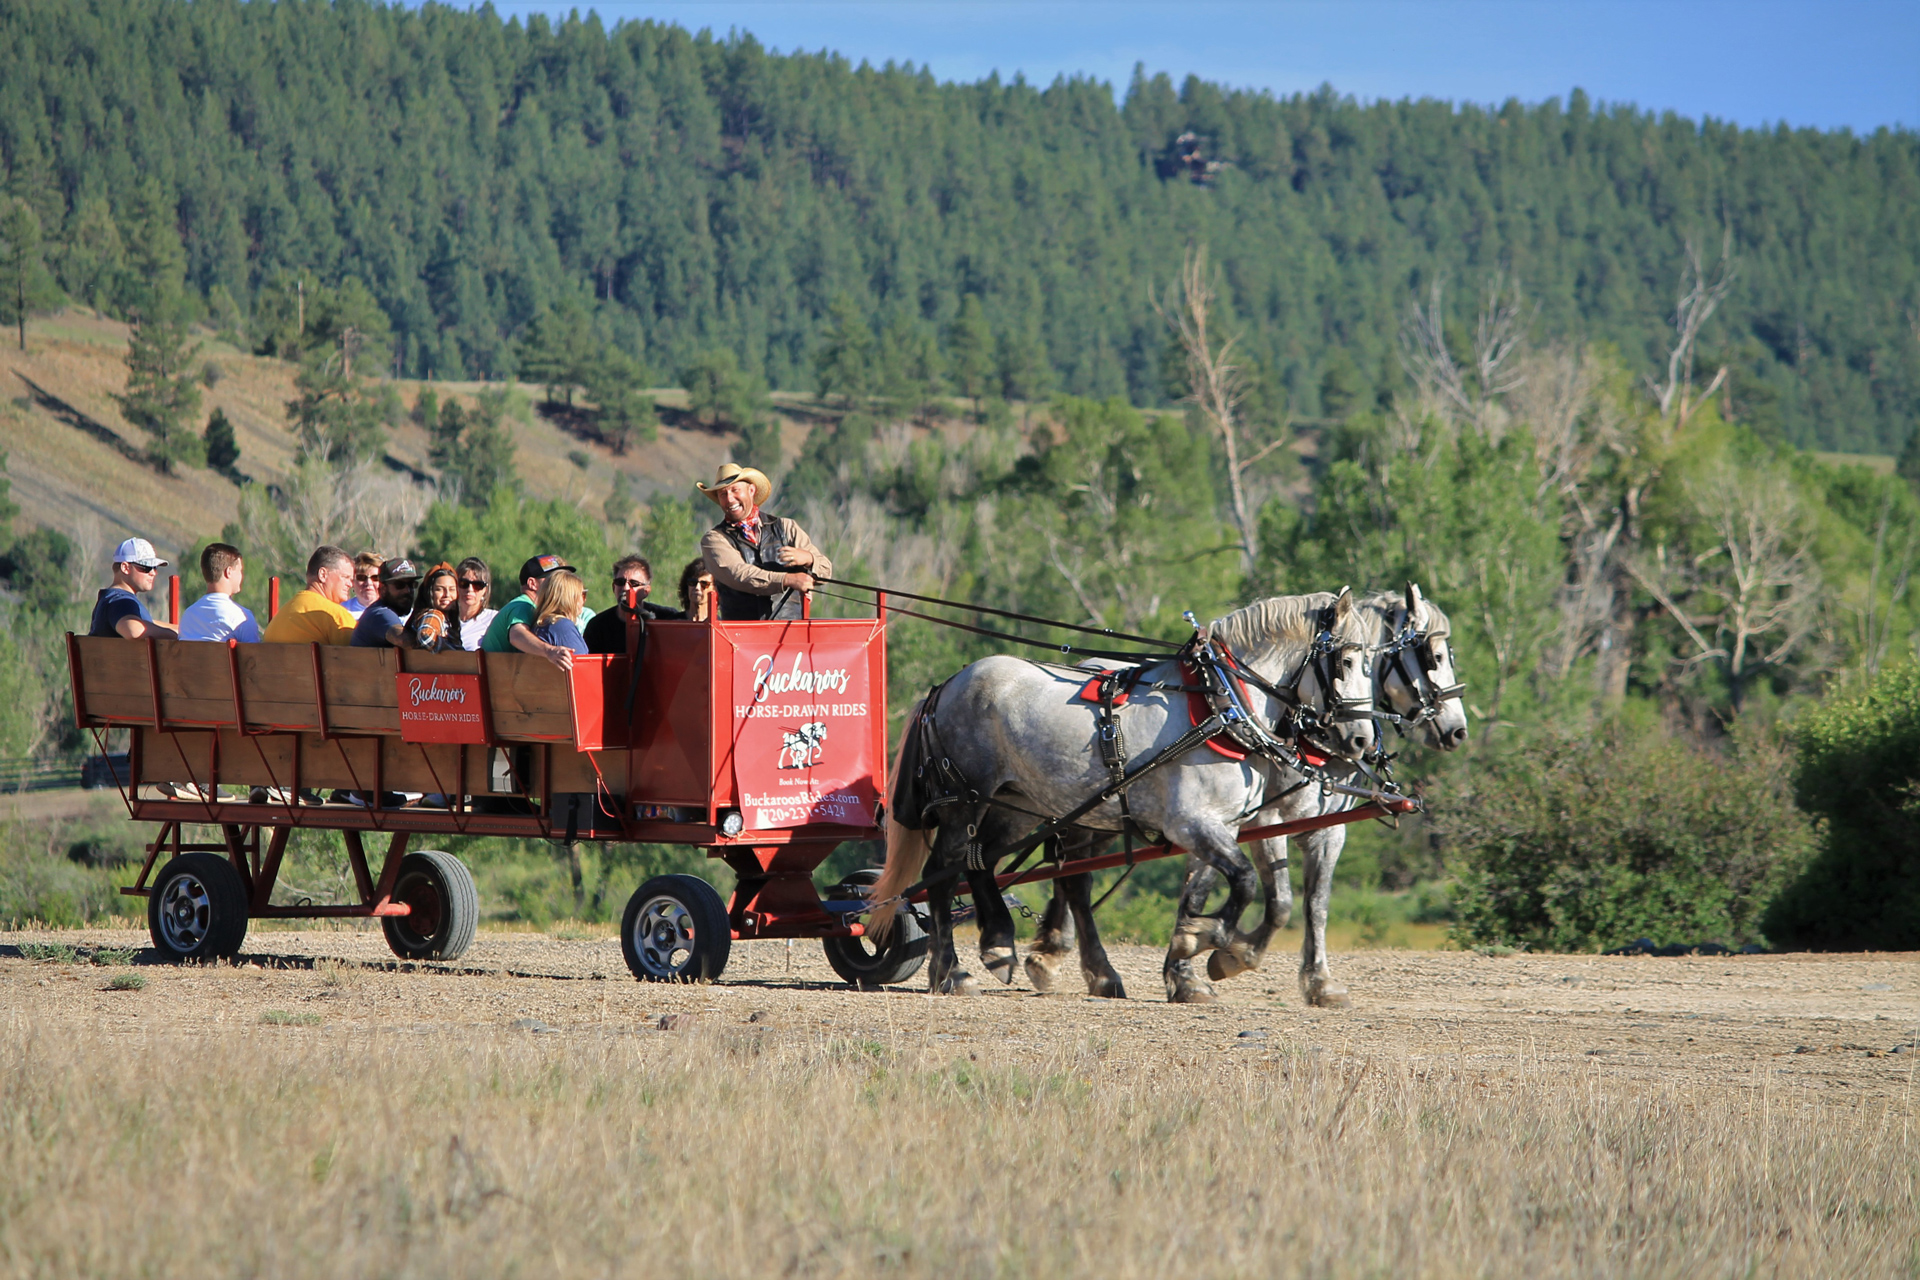 Horse wagon ride with mountains in the background